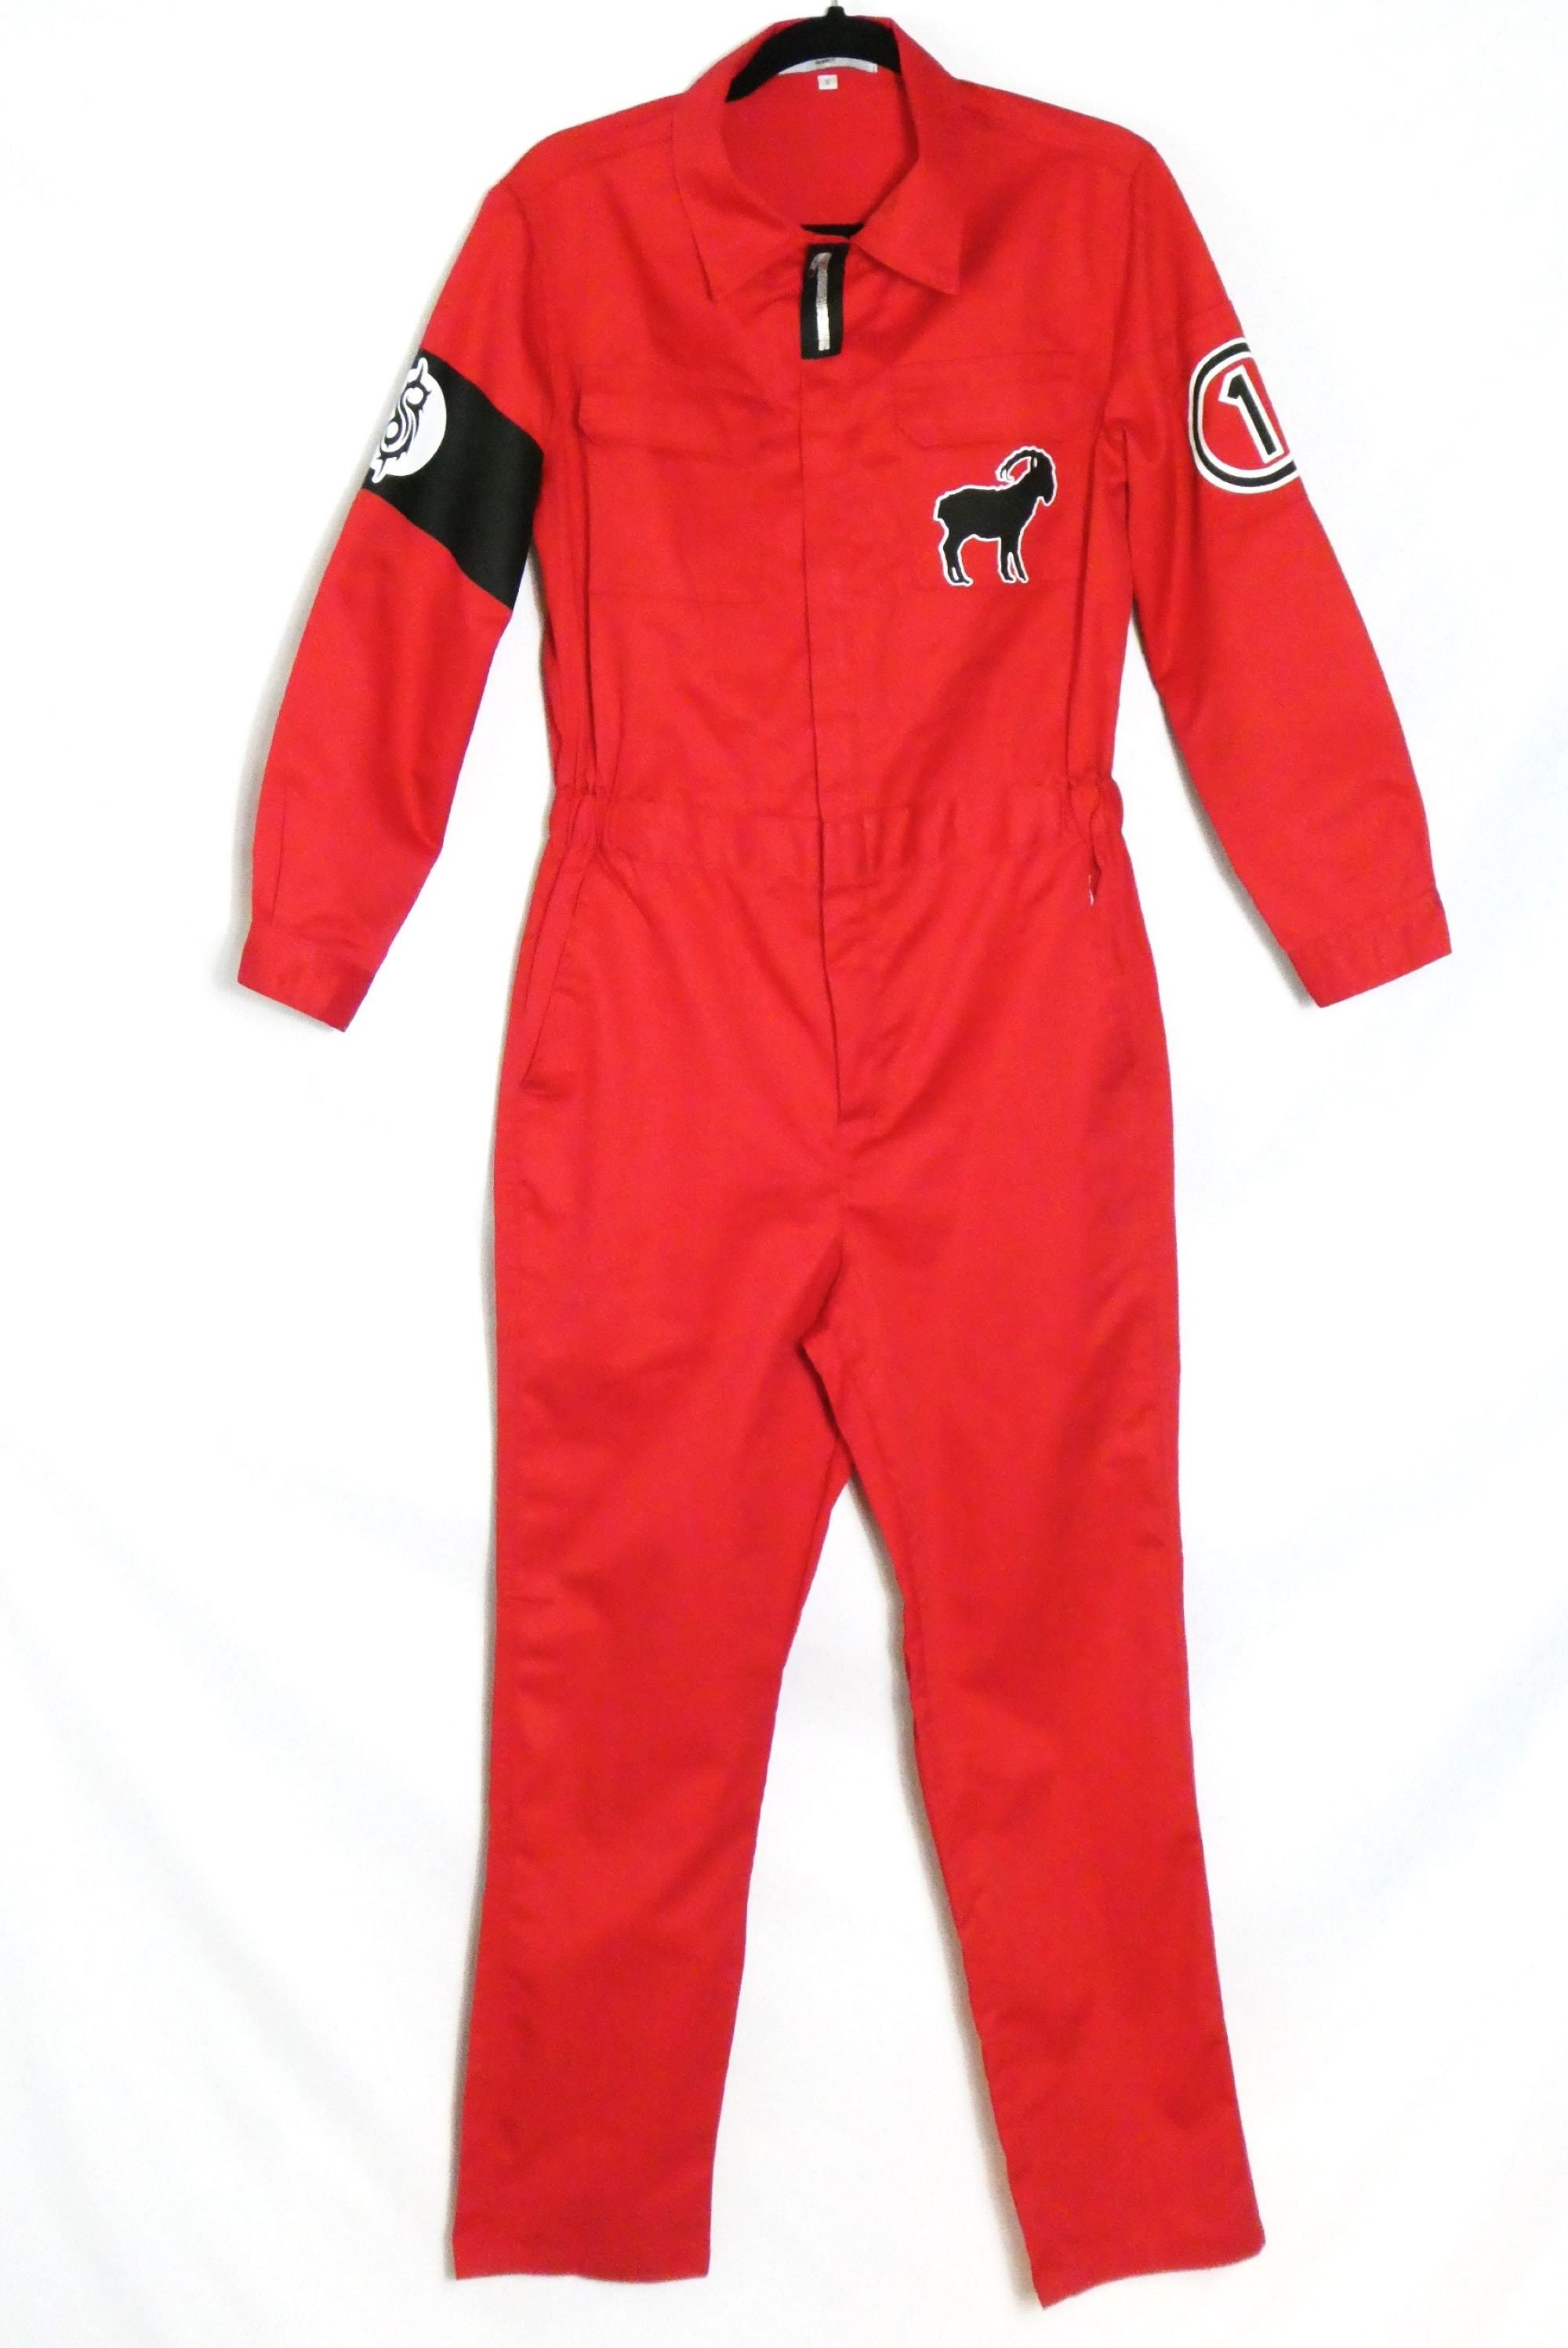 Slipknot Jumpsuit Coverall Overall Cosplay -